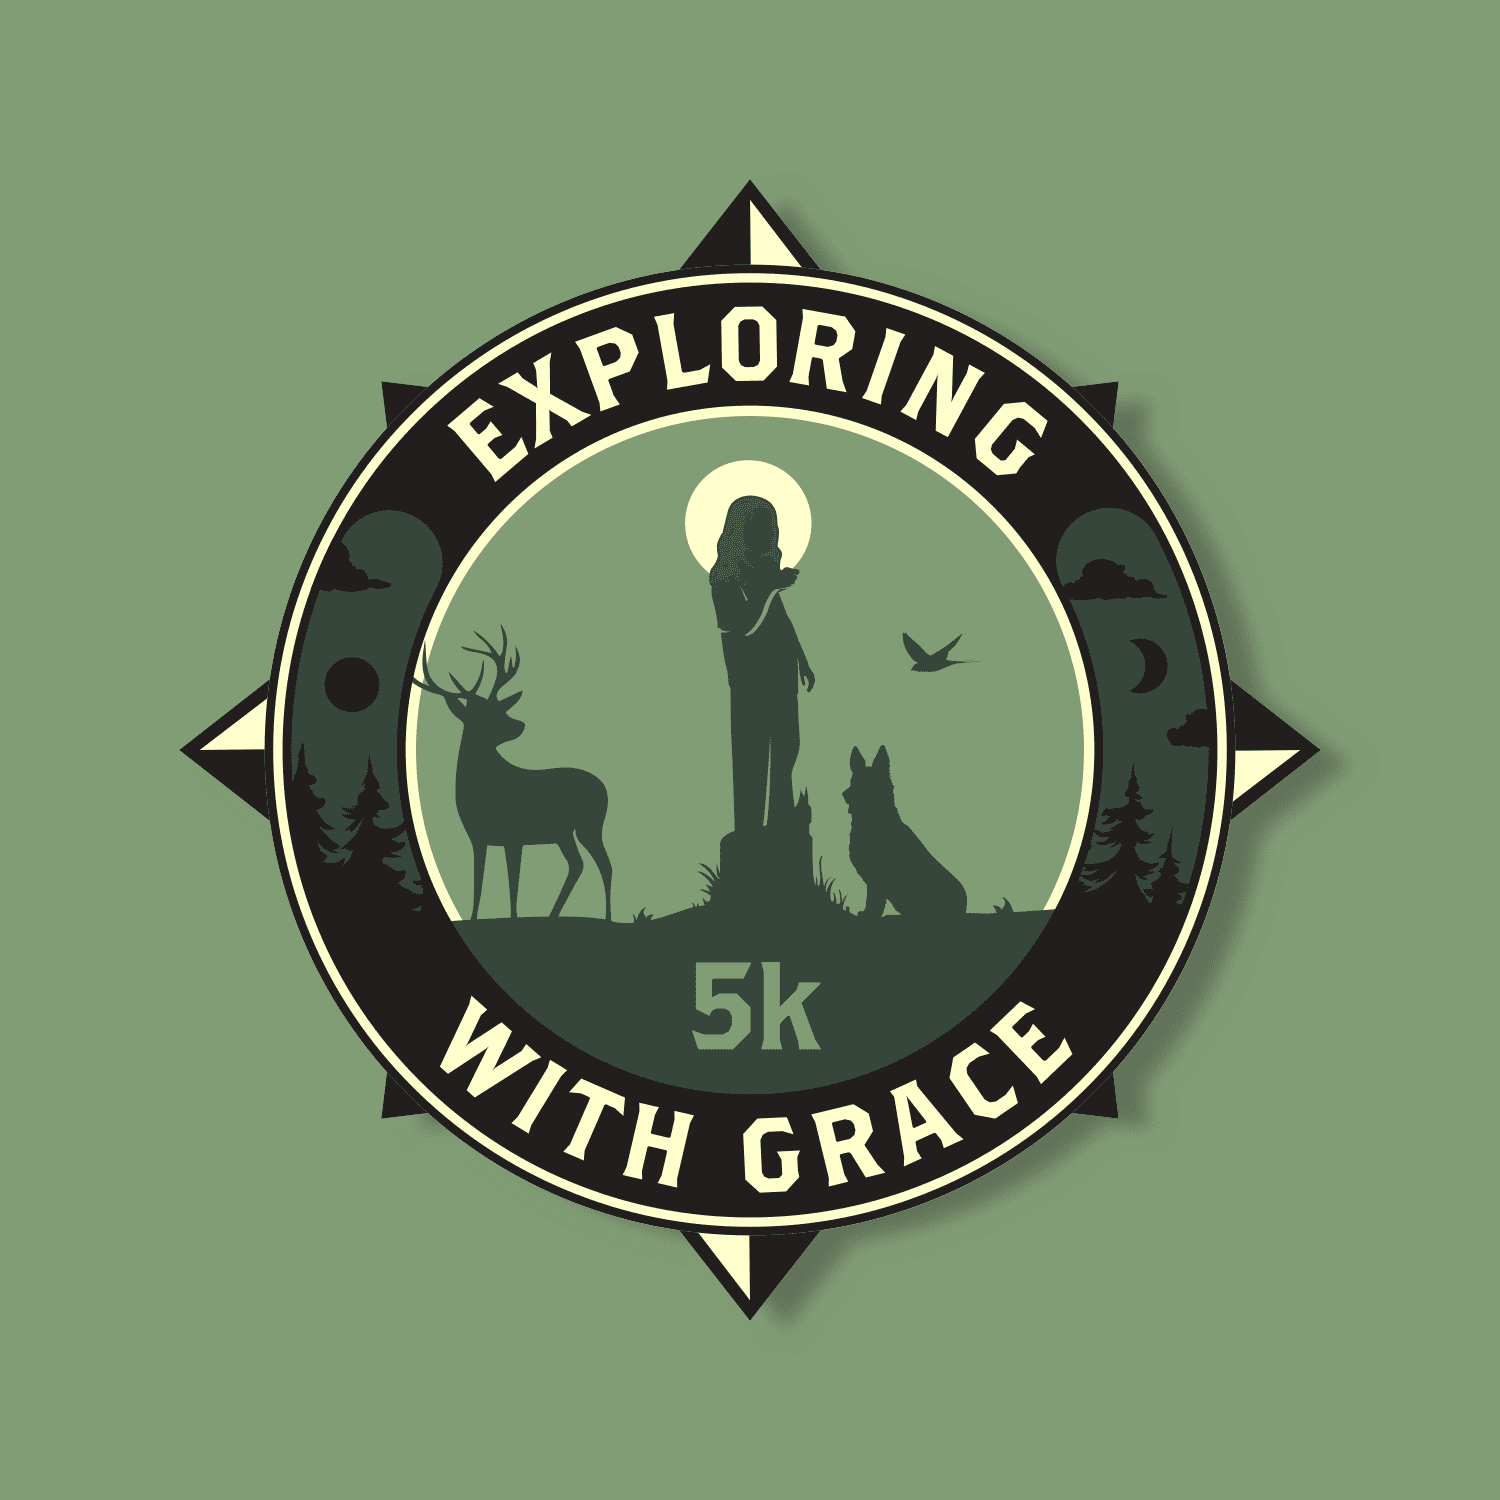 Exploring with Grace 5k